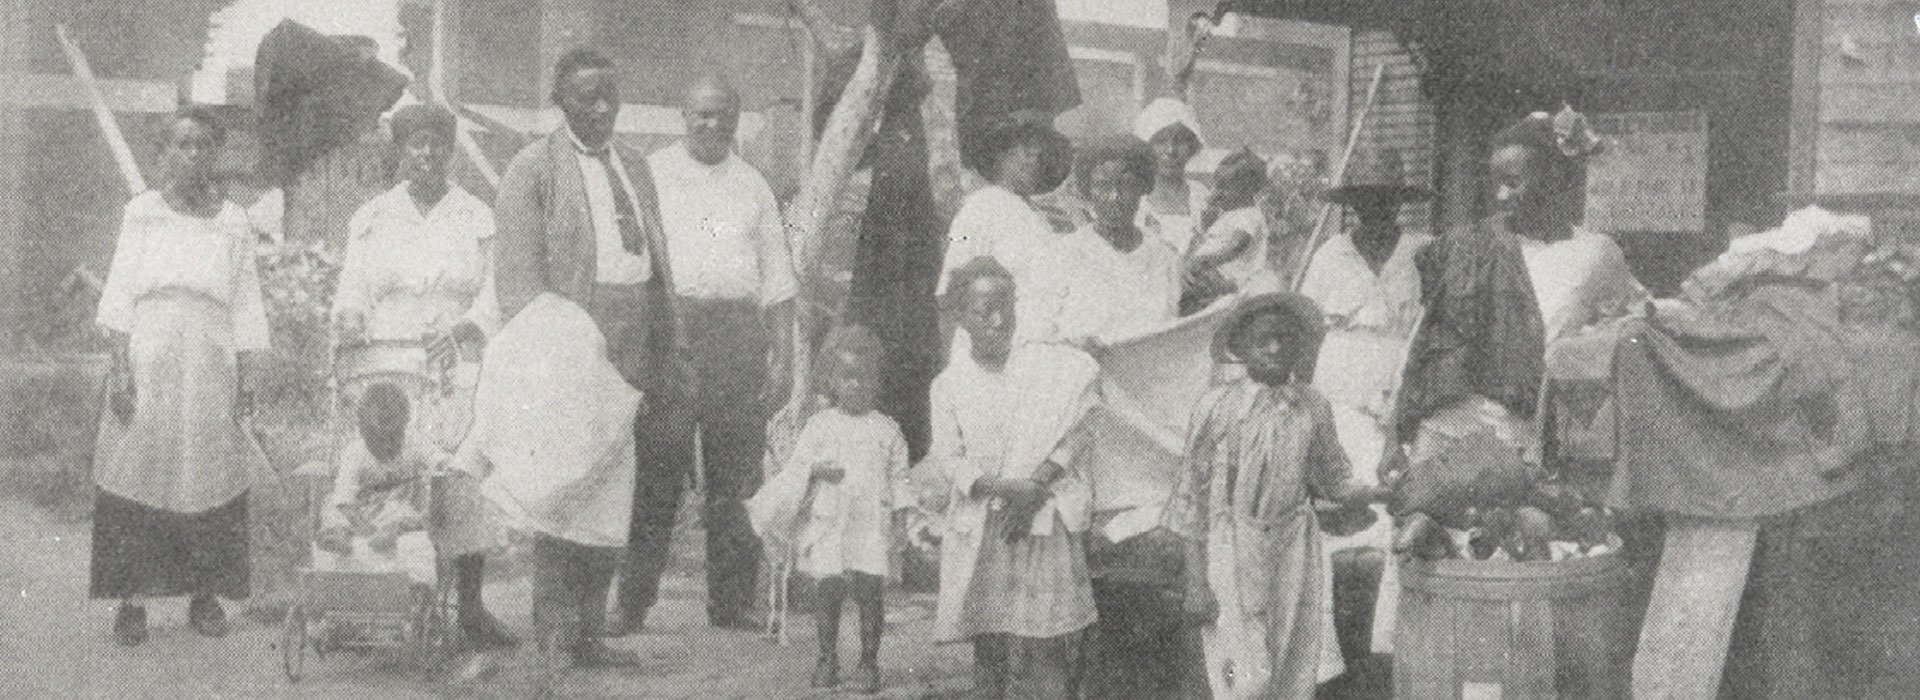 The Rev. Robert A. Whitaker, whose Mt. Zion Baptist Church was burned to the ground, distributes relief goods with his family to refugees after the massacre.